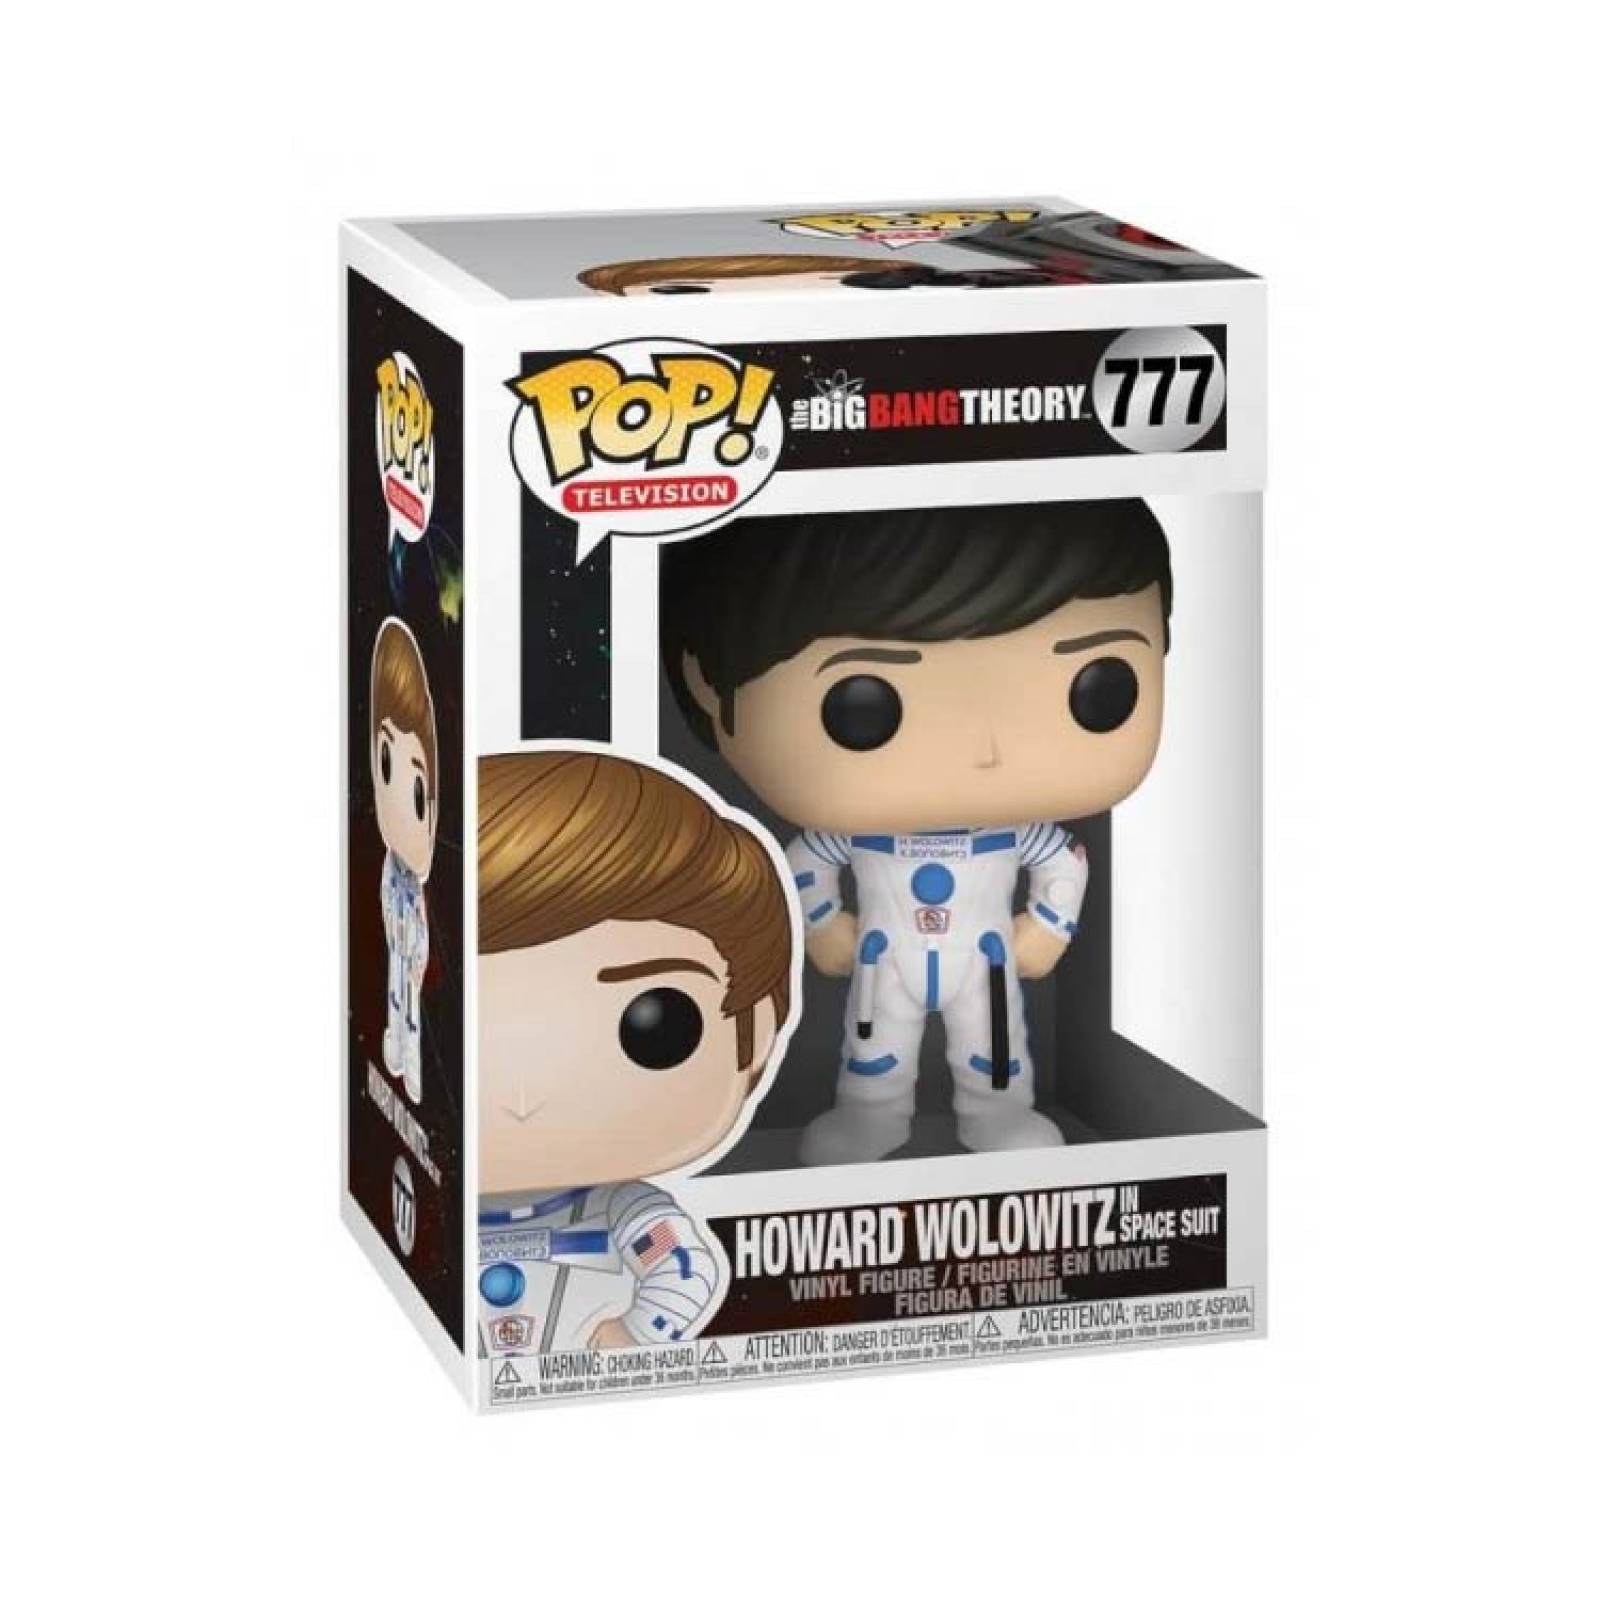 Funko Pop Howard Wolowitz in Space Suit The Big Bang Theory